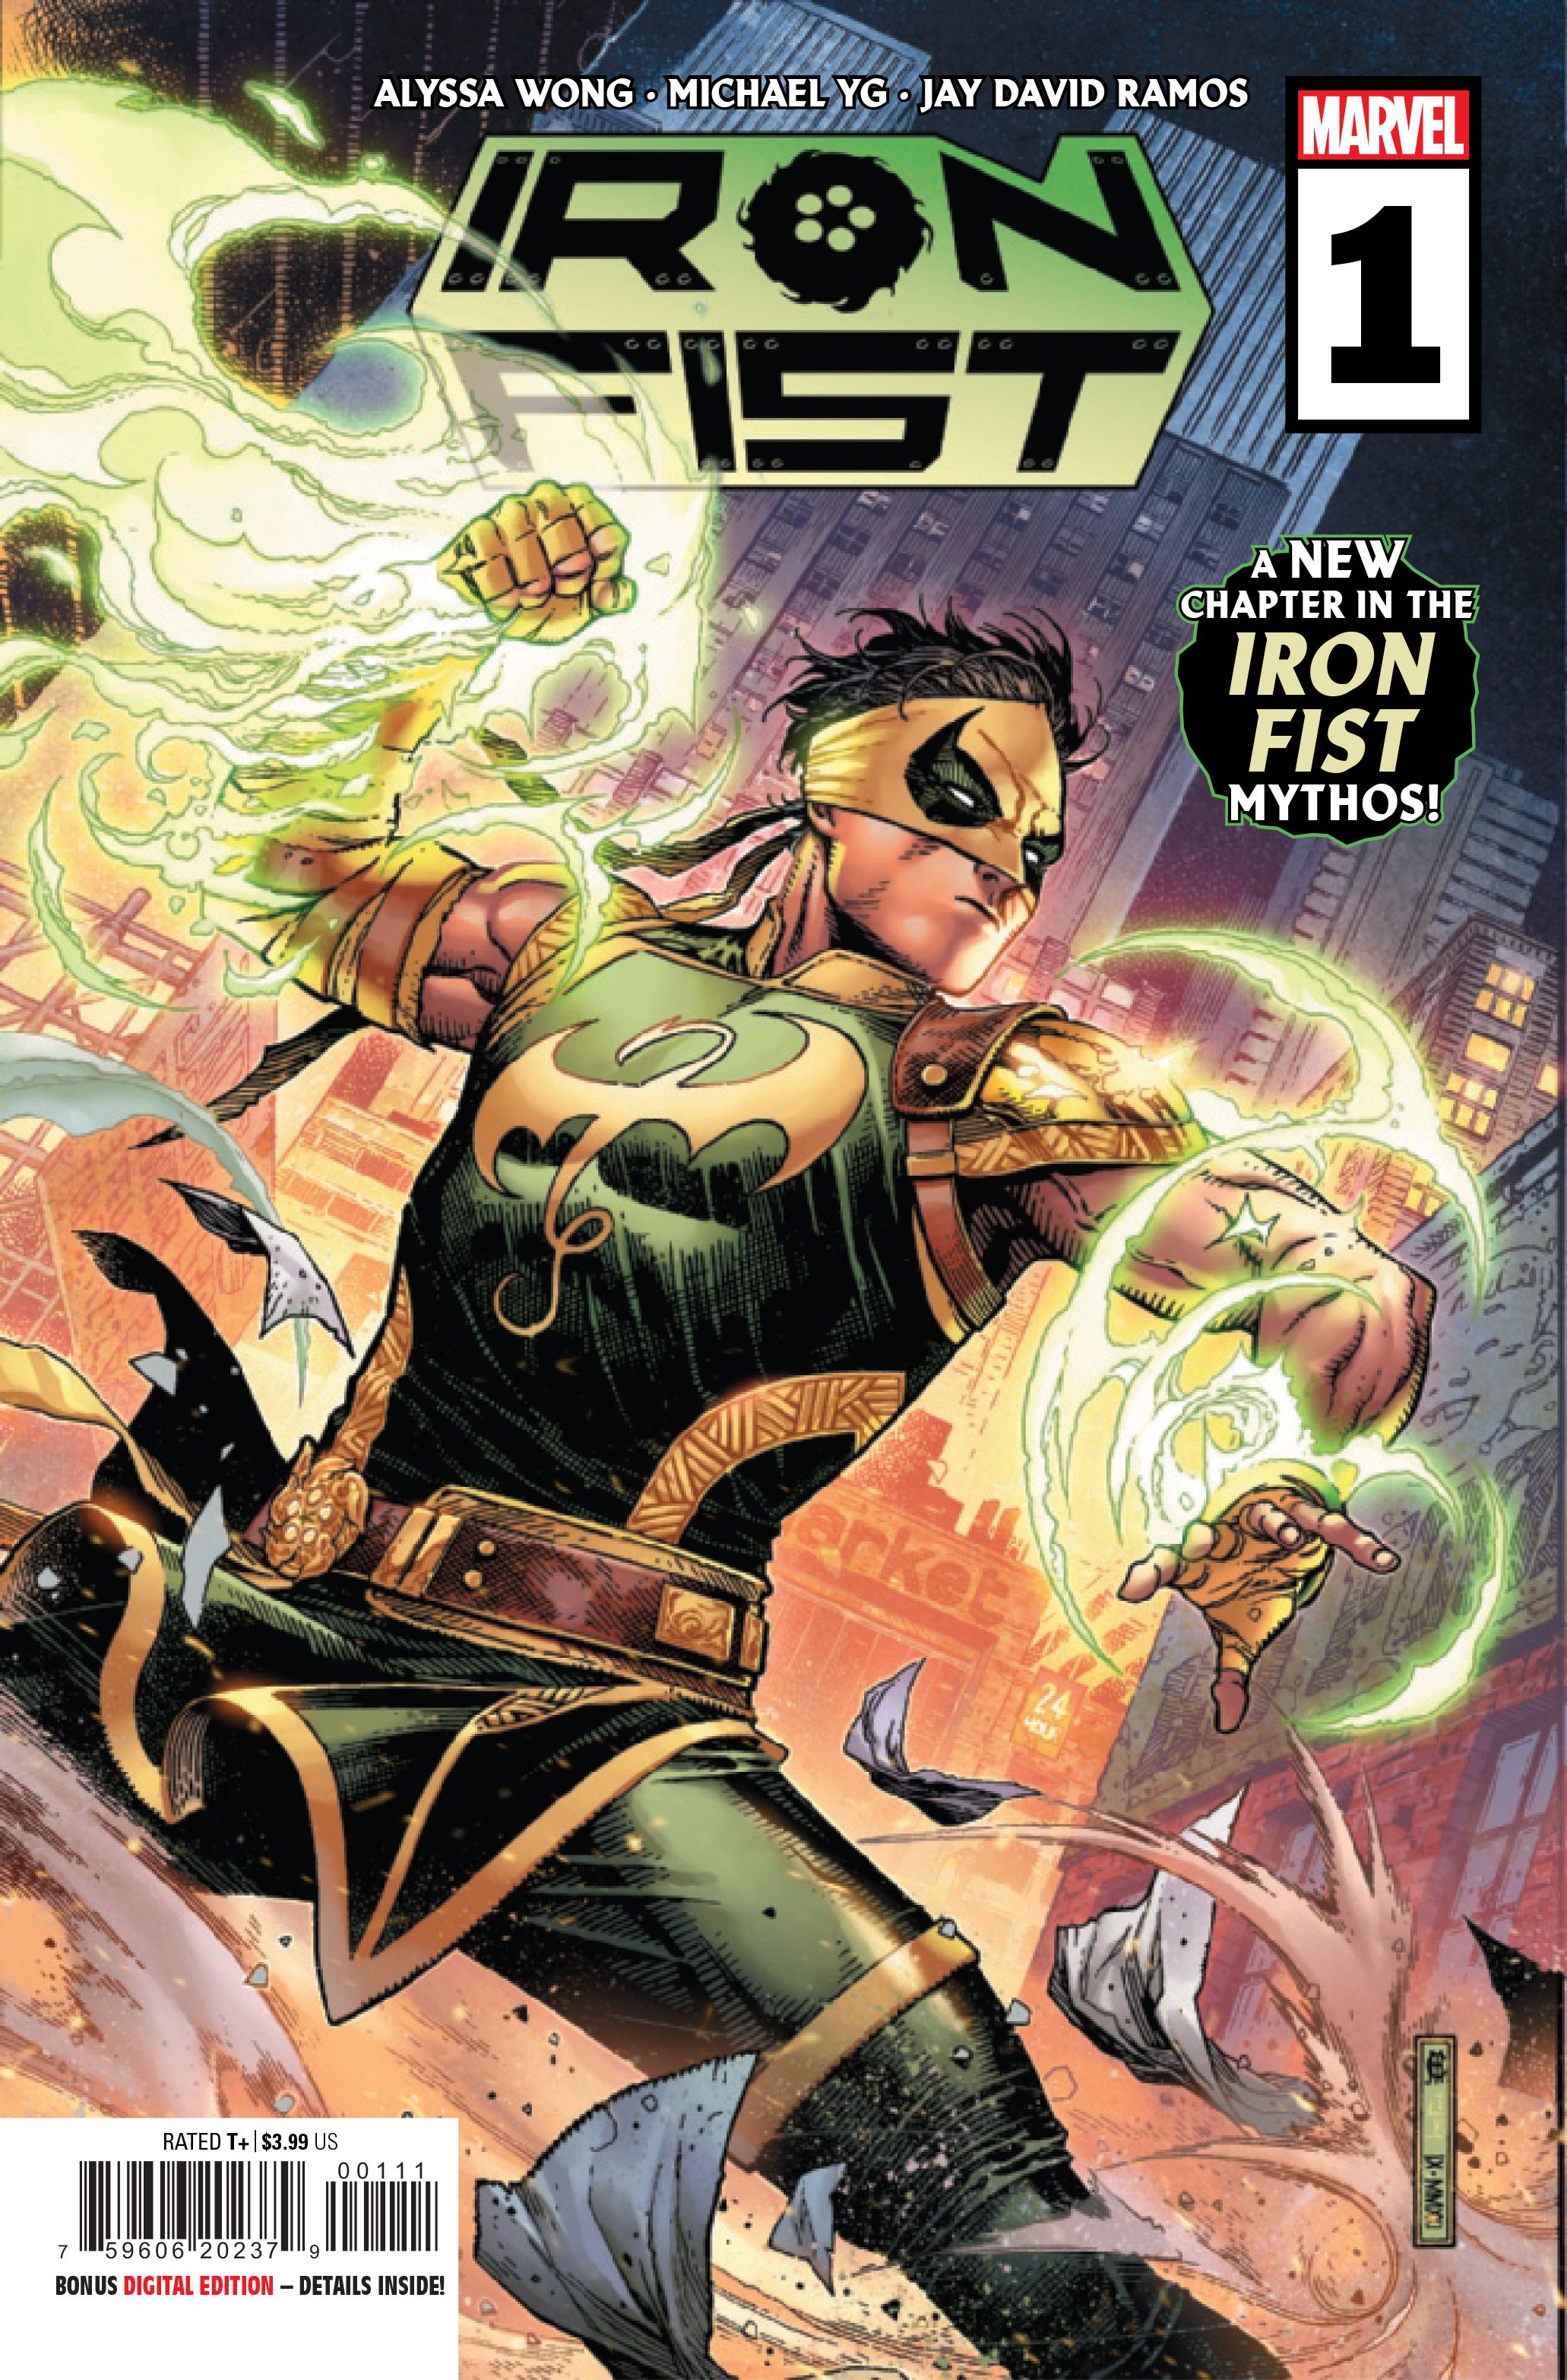 Cover for Iron Fist #1